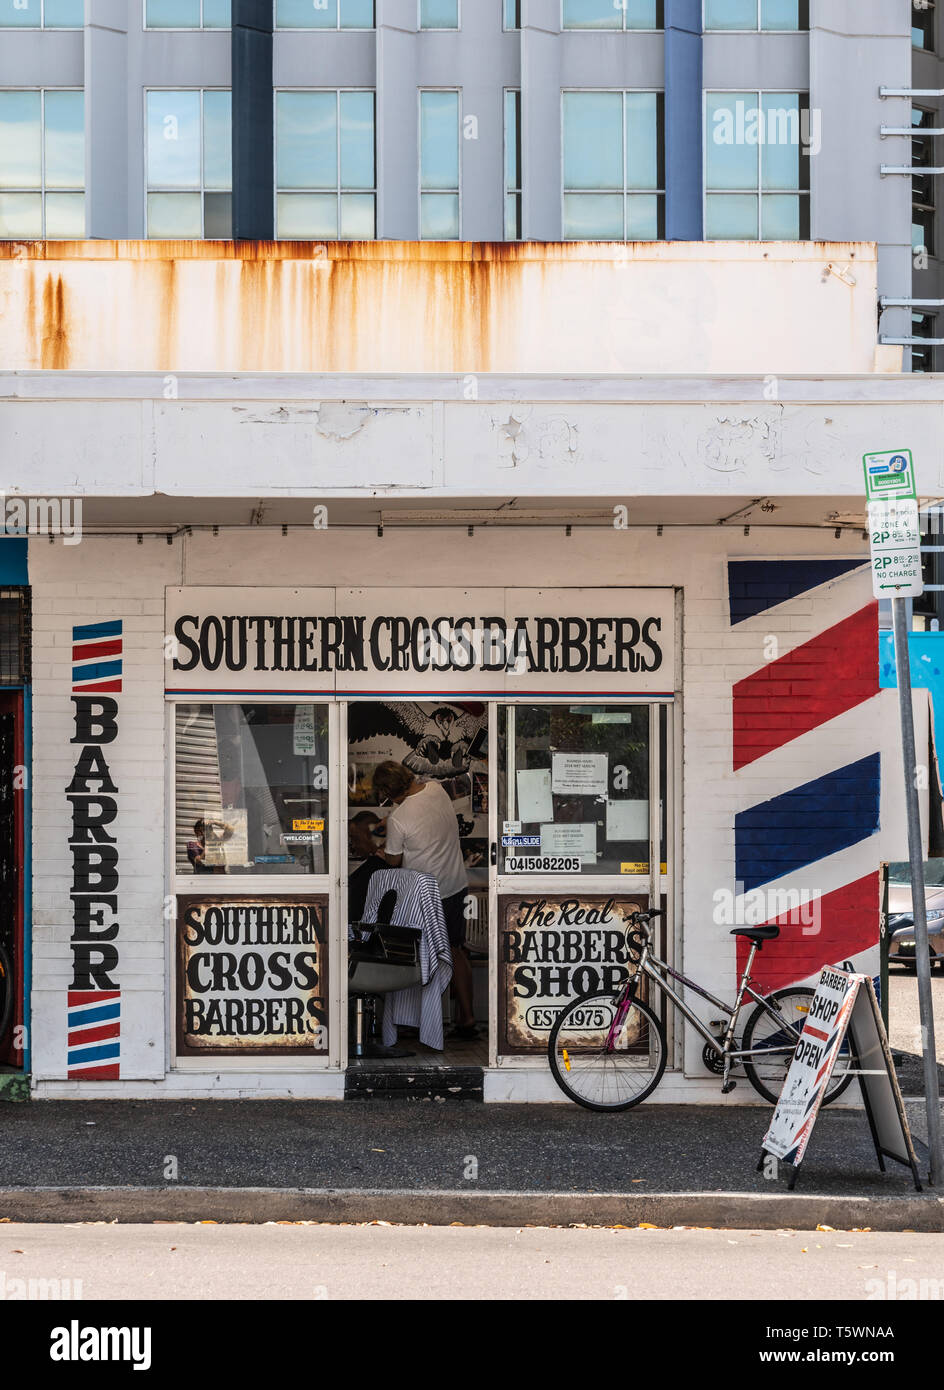 Permanent Defekt announcer Darwin Australia - February 22, 2019: Small iconic Southern Cross Barbers  shop in Bennett Street downtown, shows classic white and red colors. Barber  Stock Photo - Alamy